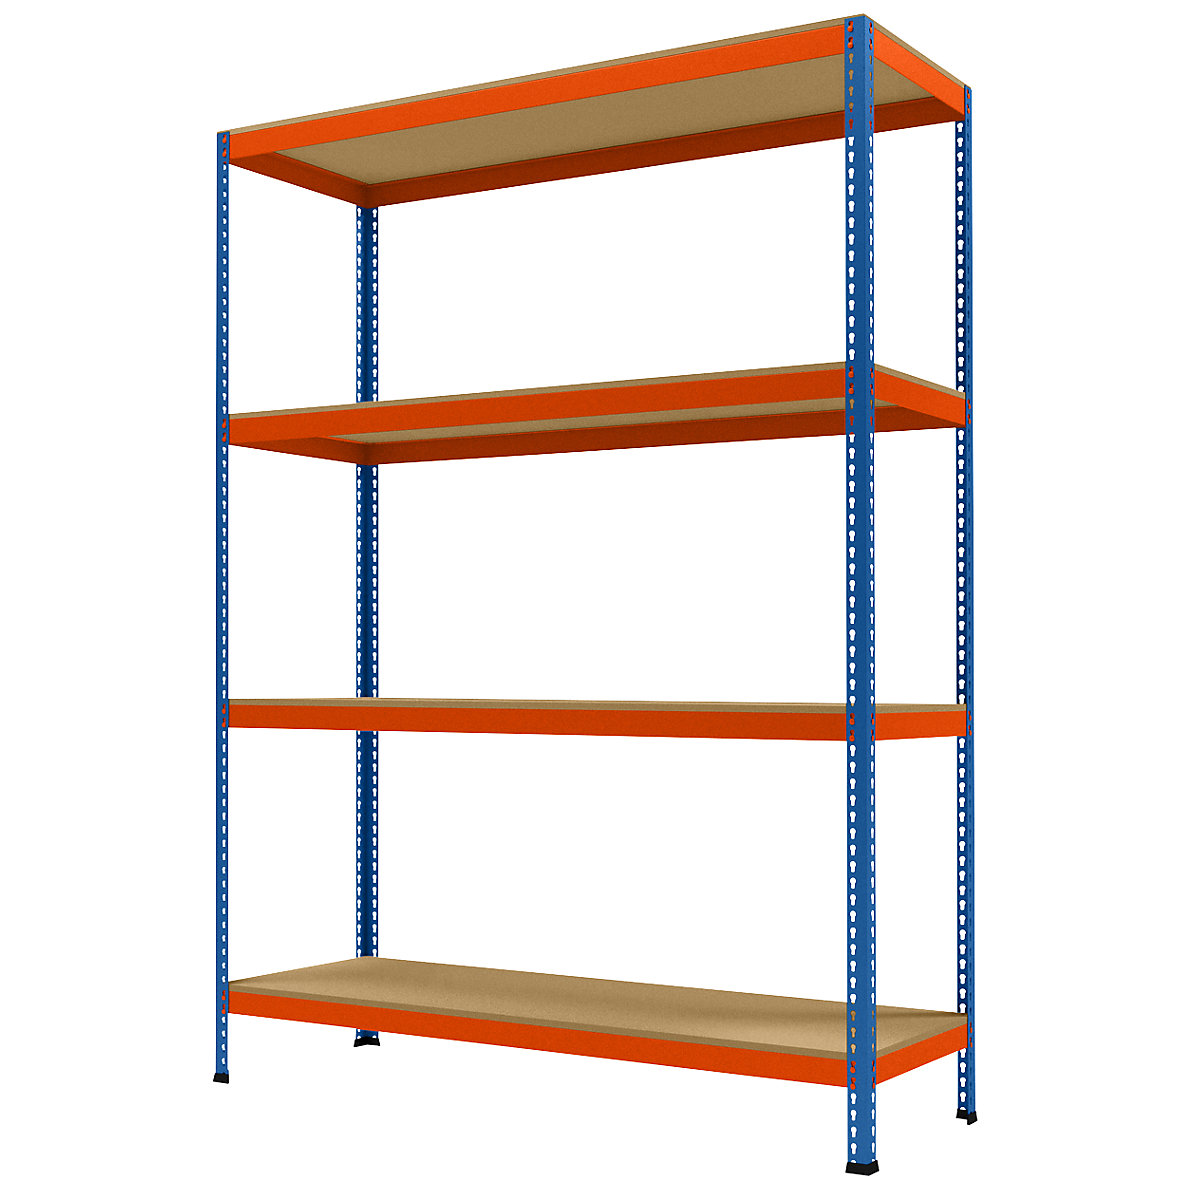 Wide span heavy duty shelving, height 2438 mm, overall depth 621 mm, width 1841 mm